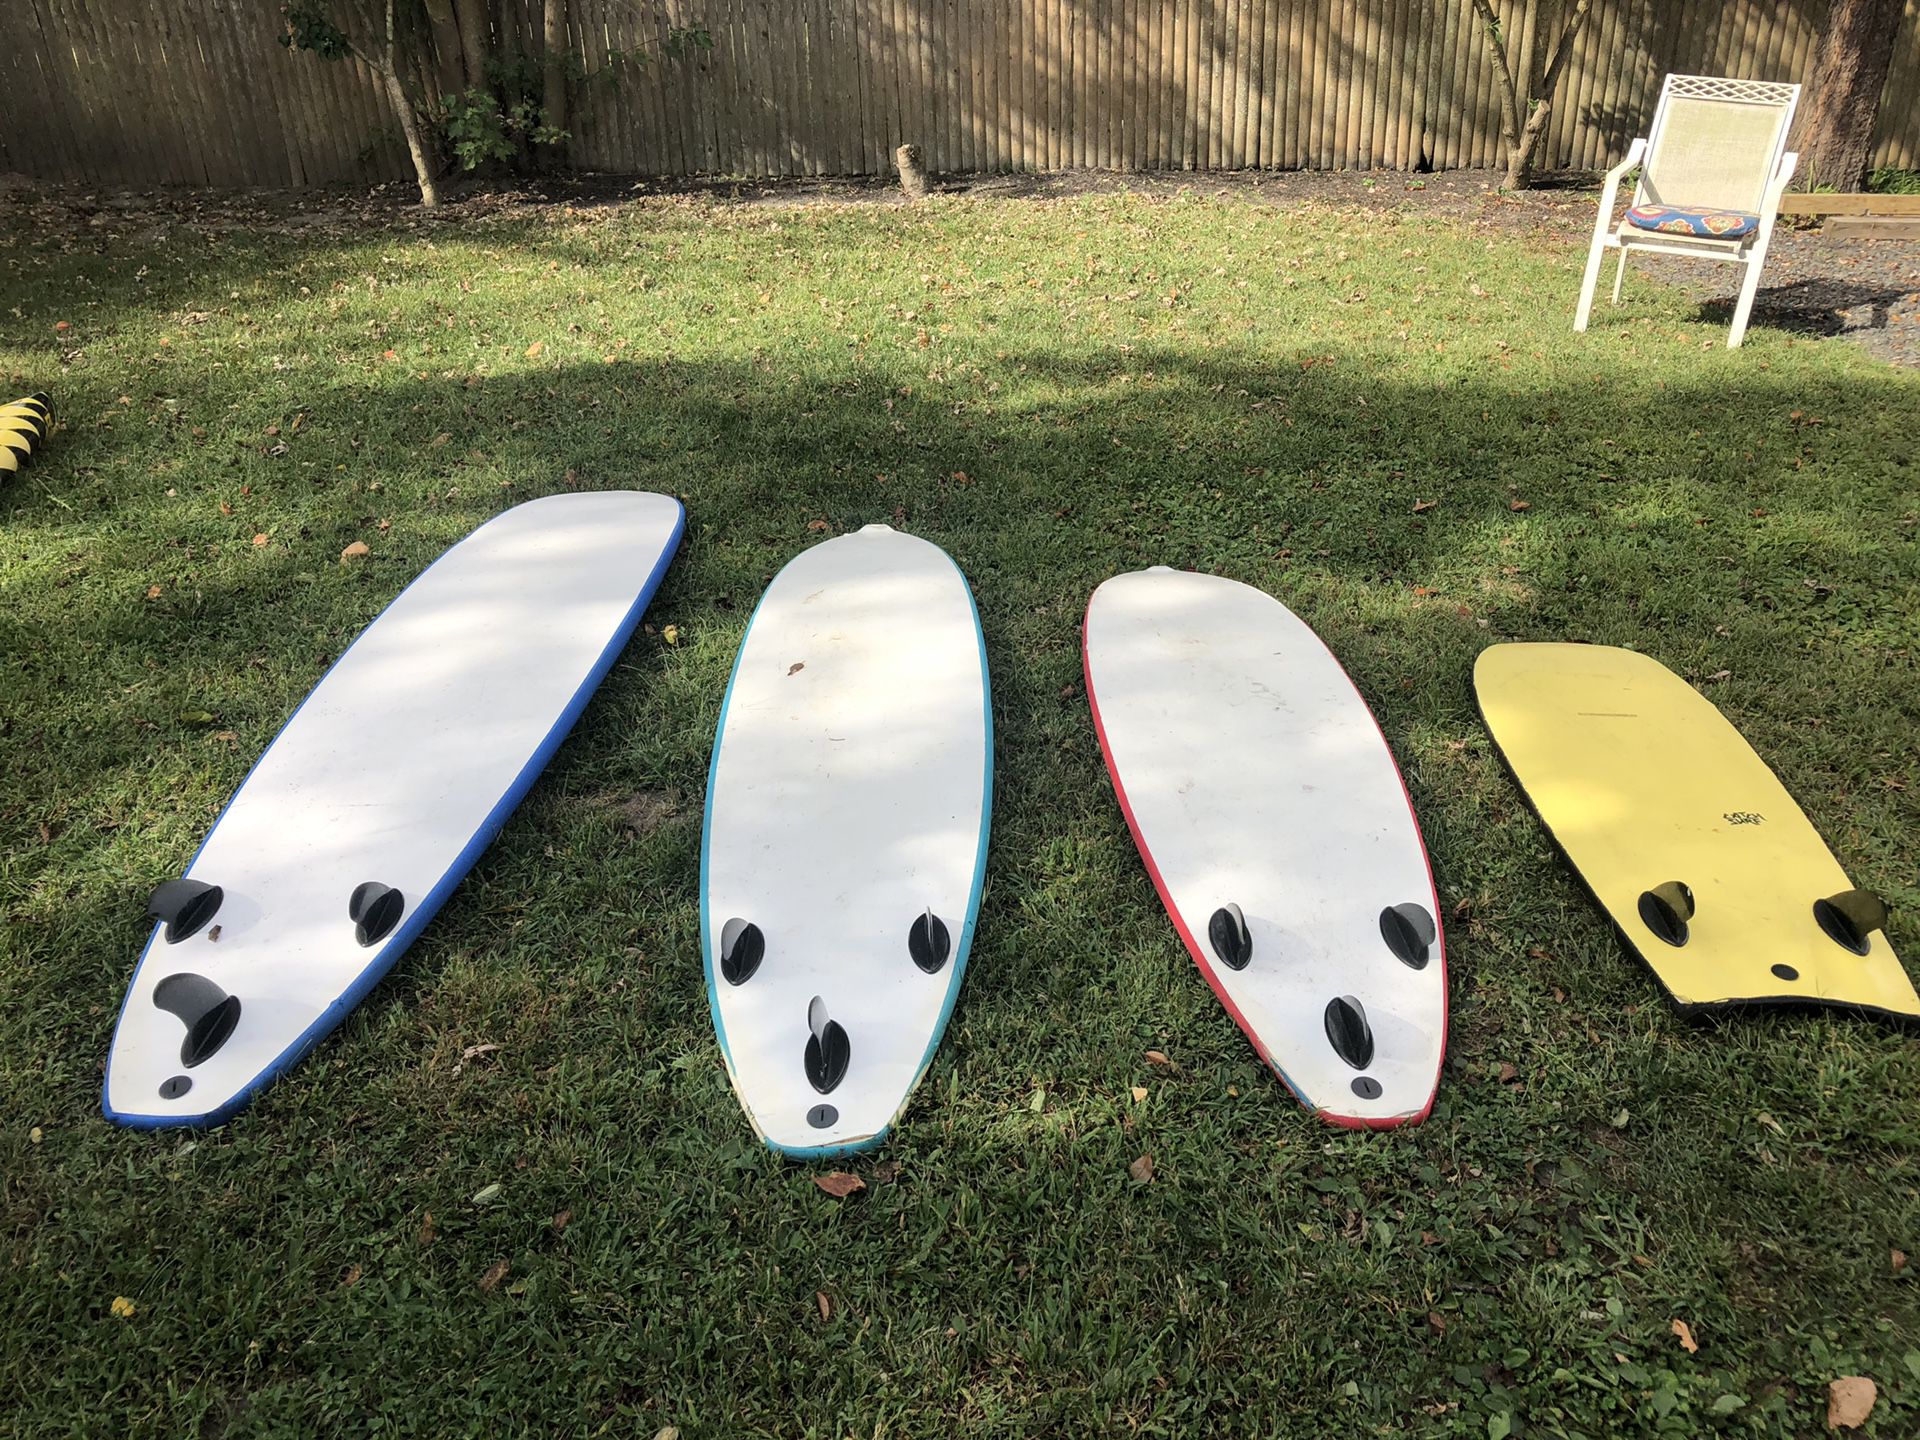 Soft top surfboards